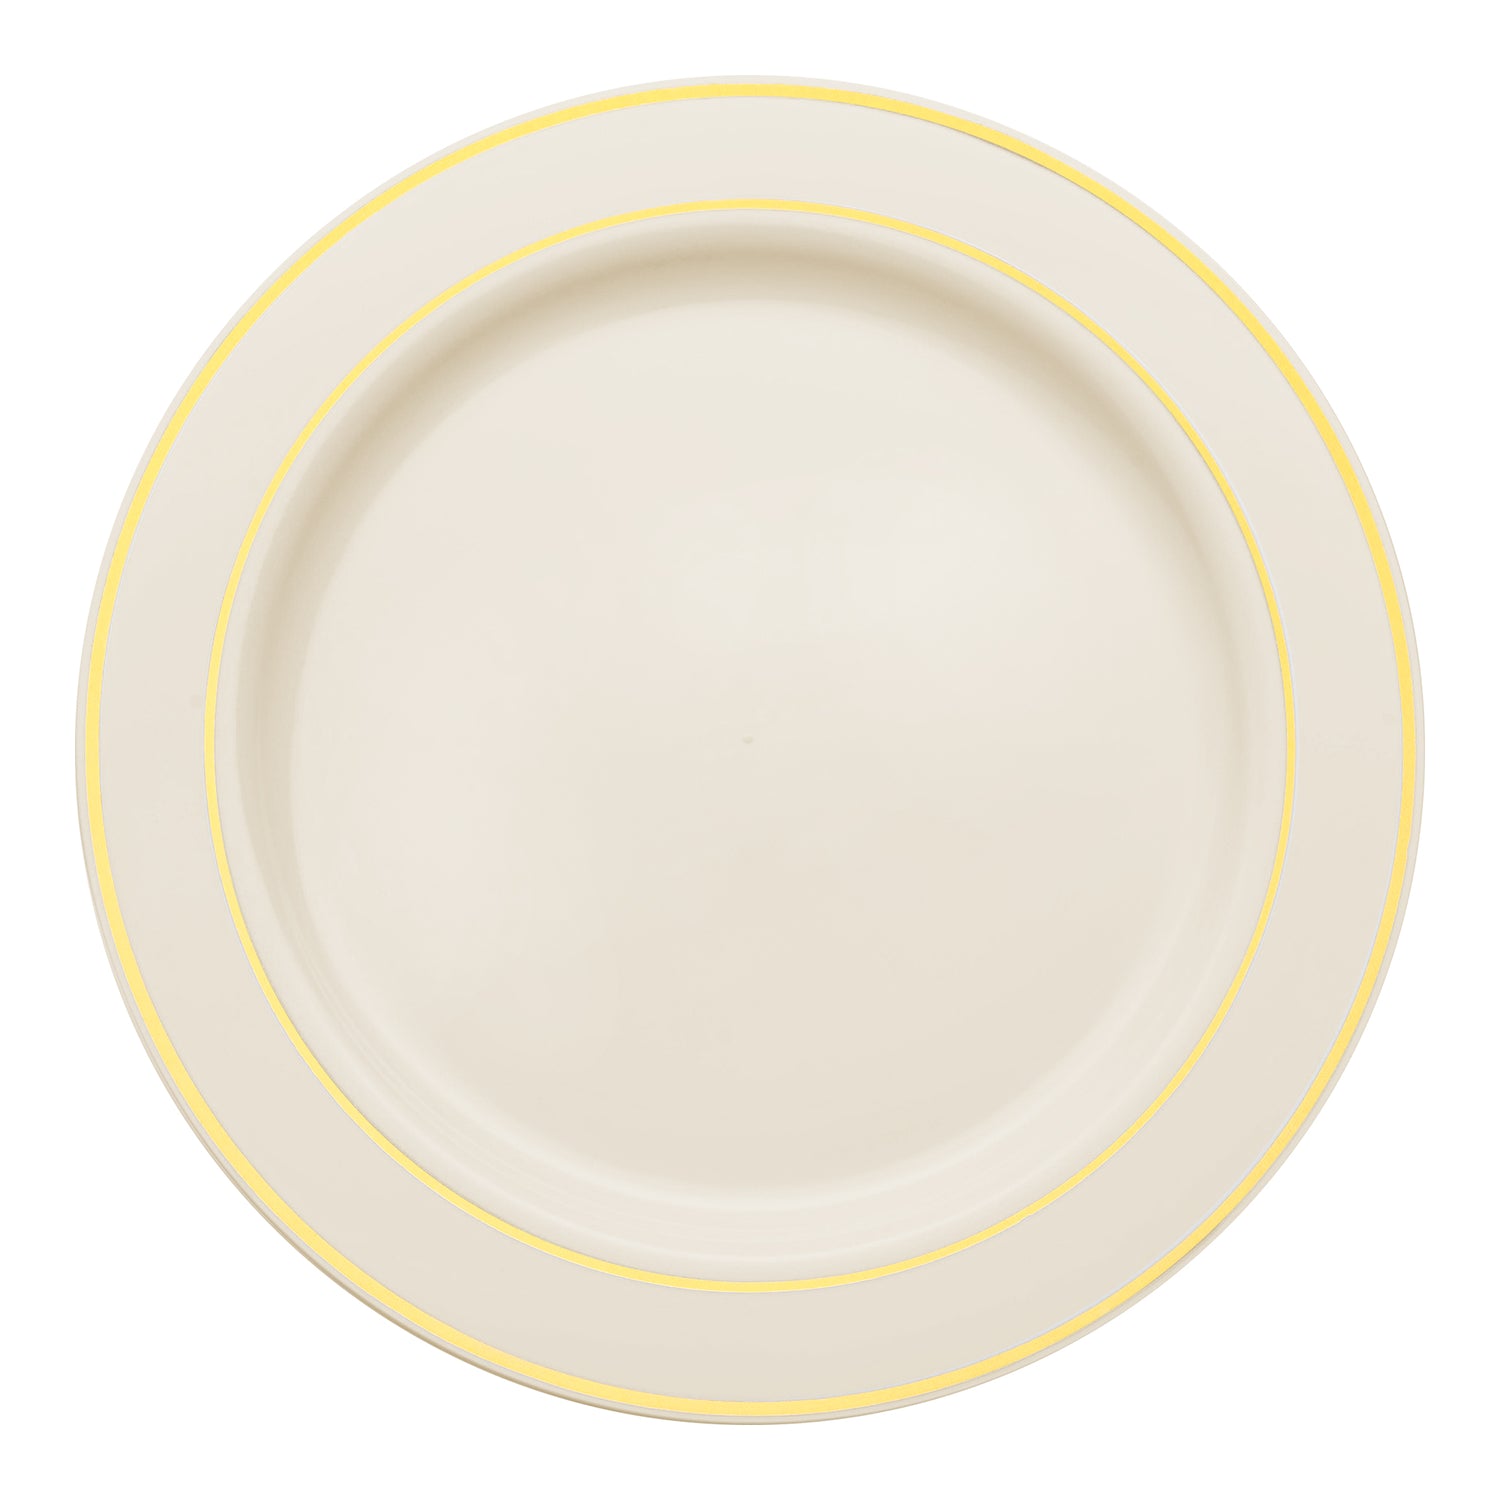 Ivory with Gold Edge Rim Disposable Plastic Dinner Plates (10.25)